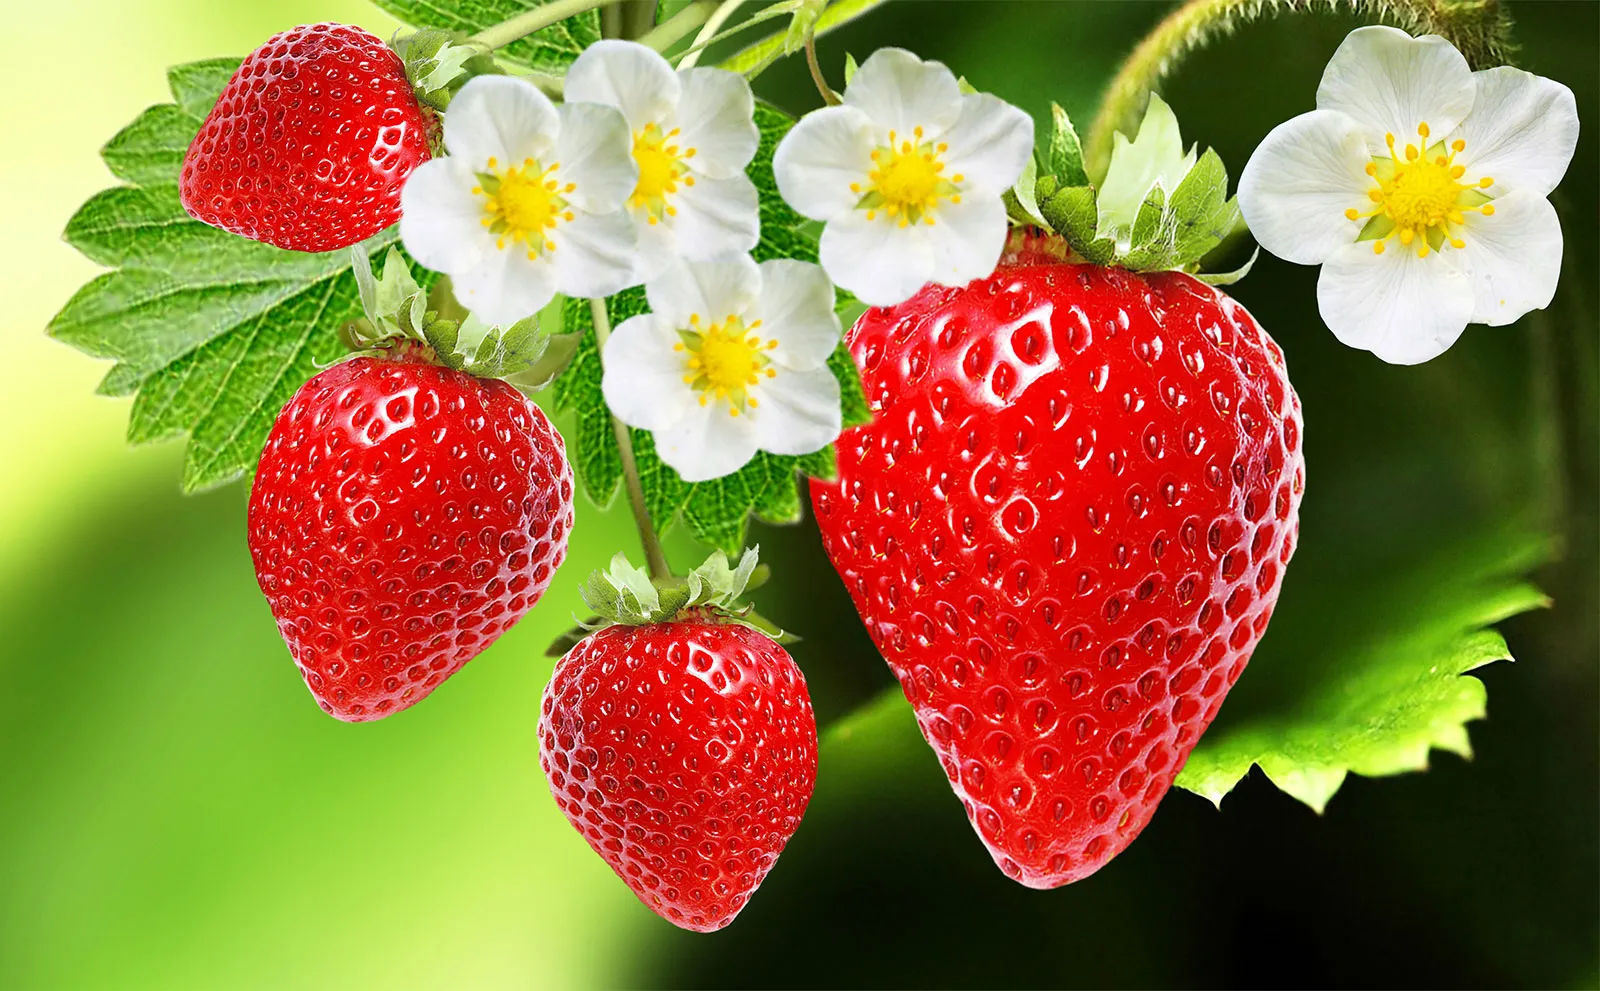 Complete guide on strawberry farming